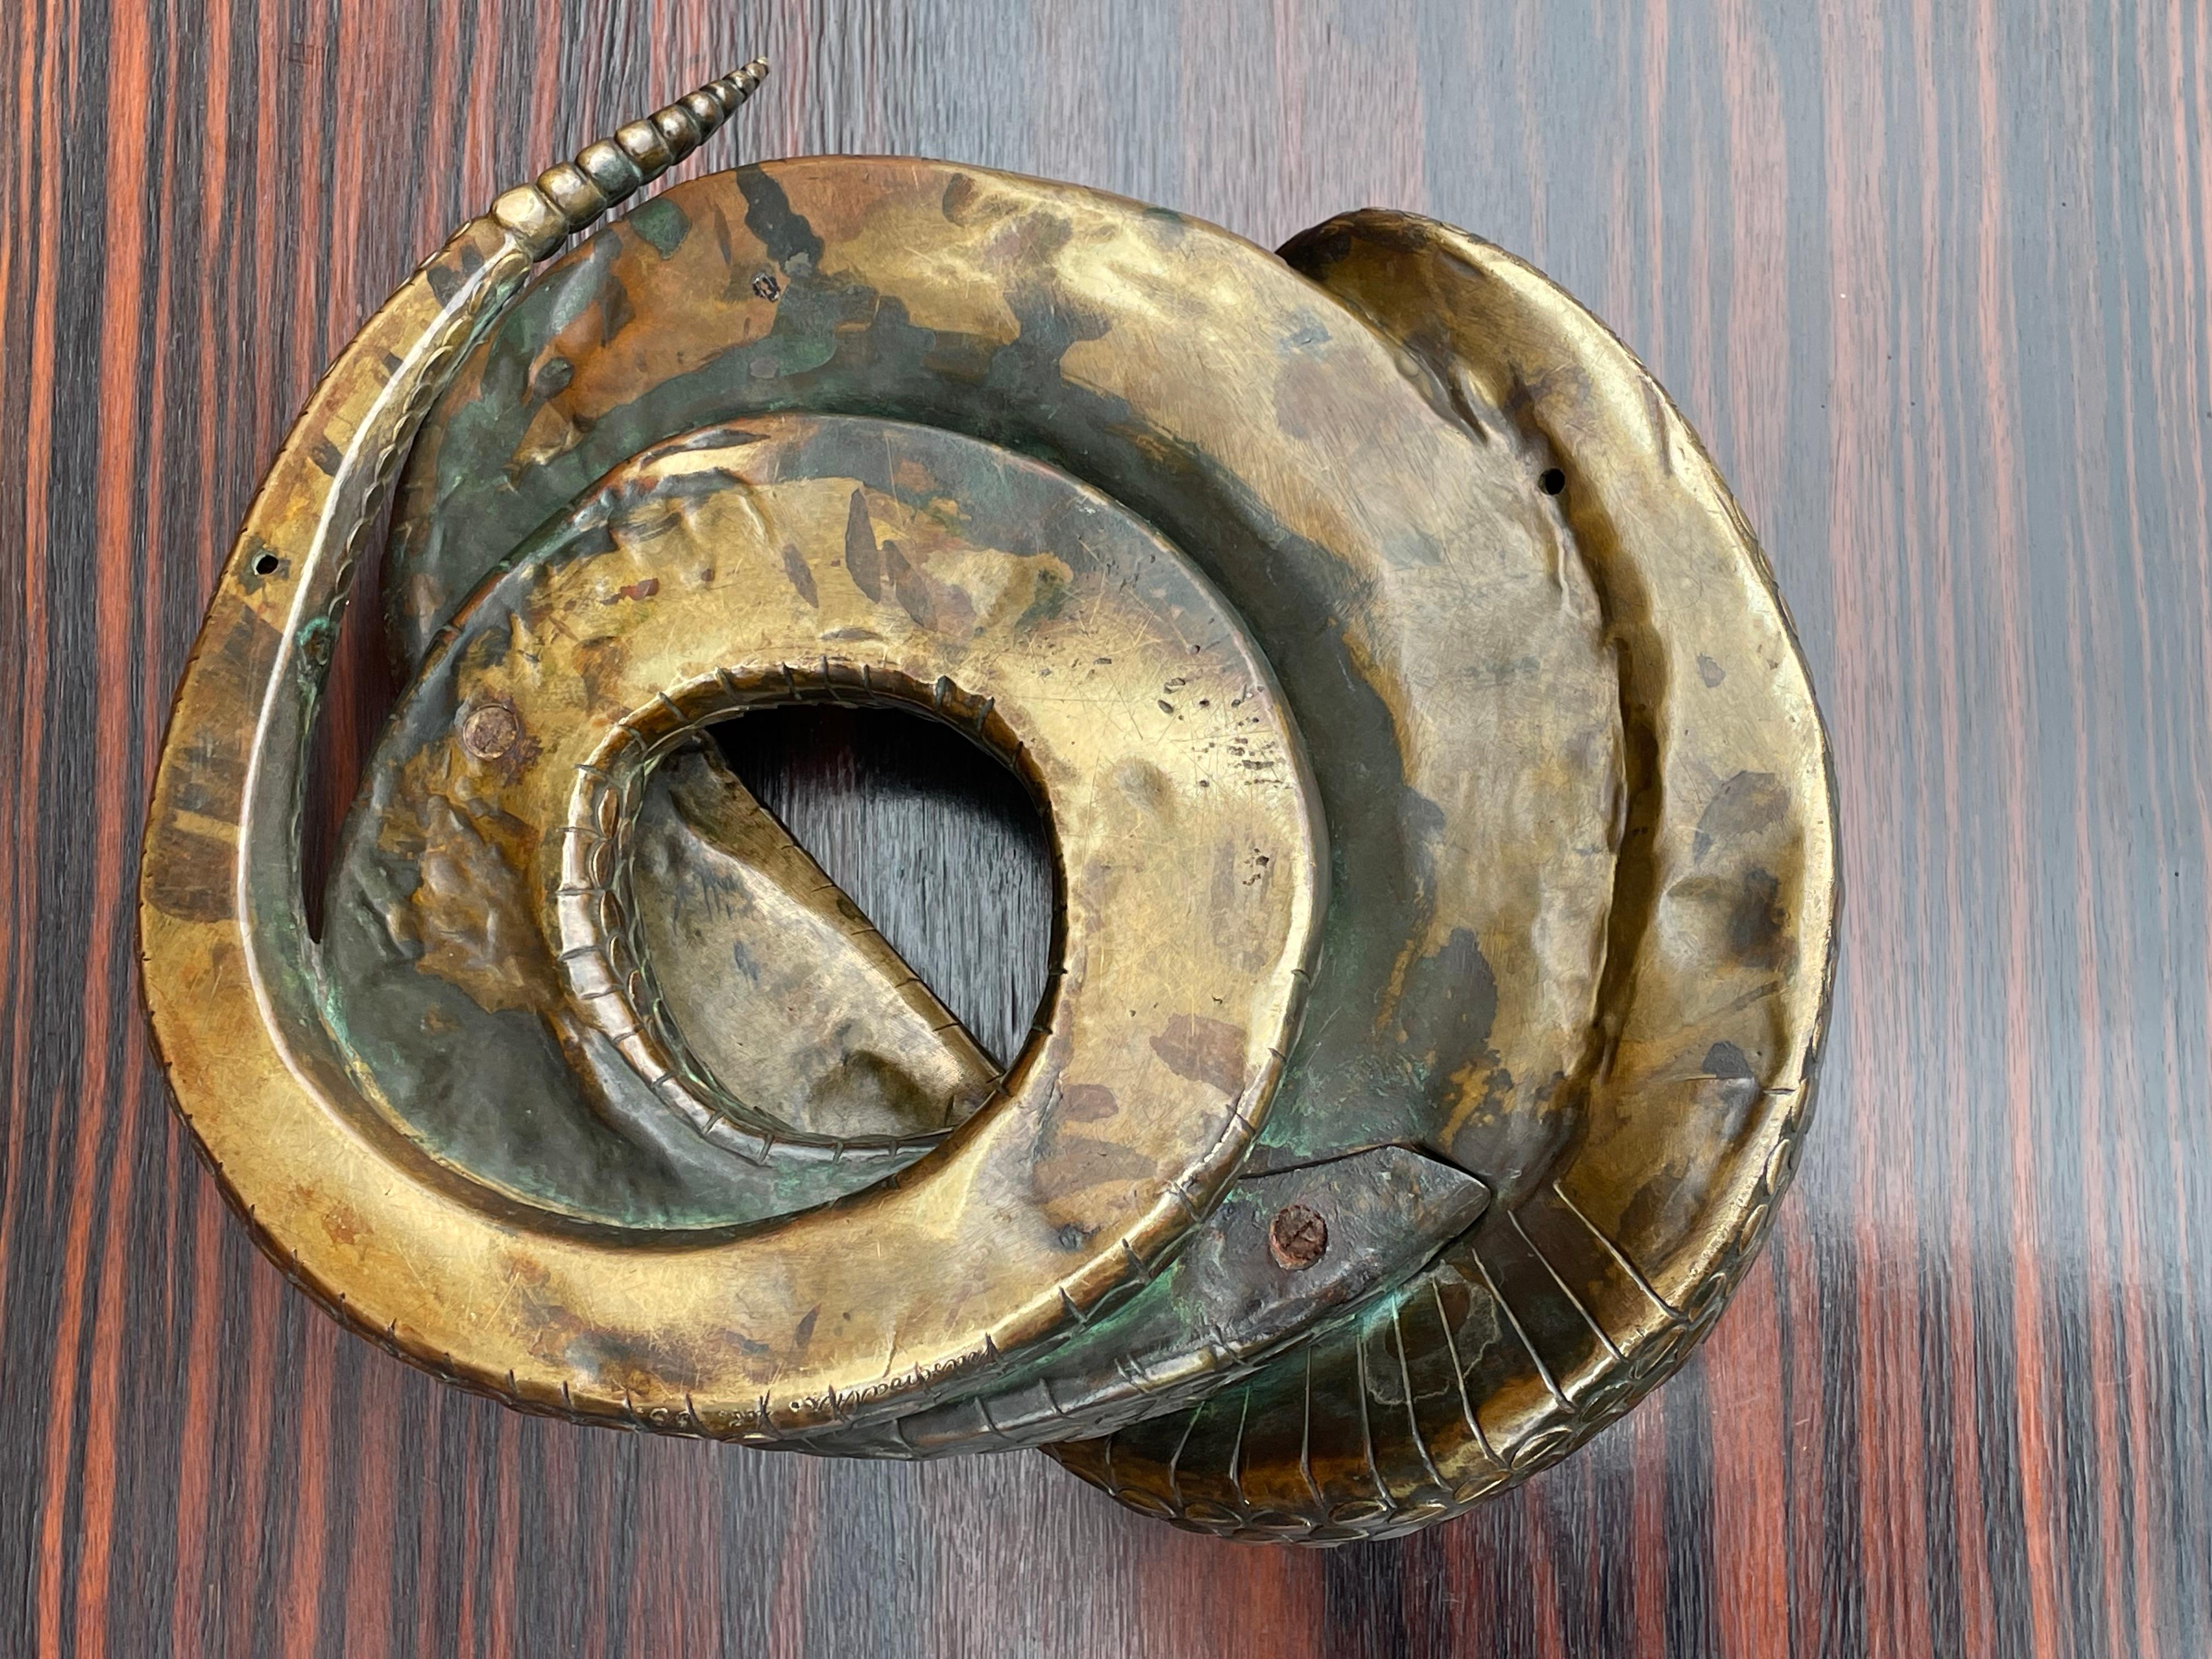 Museum Worthy Antique Bronze Coiled Rattlesnake Sculpture Signed & Marked 1885  For Sale 4